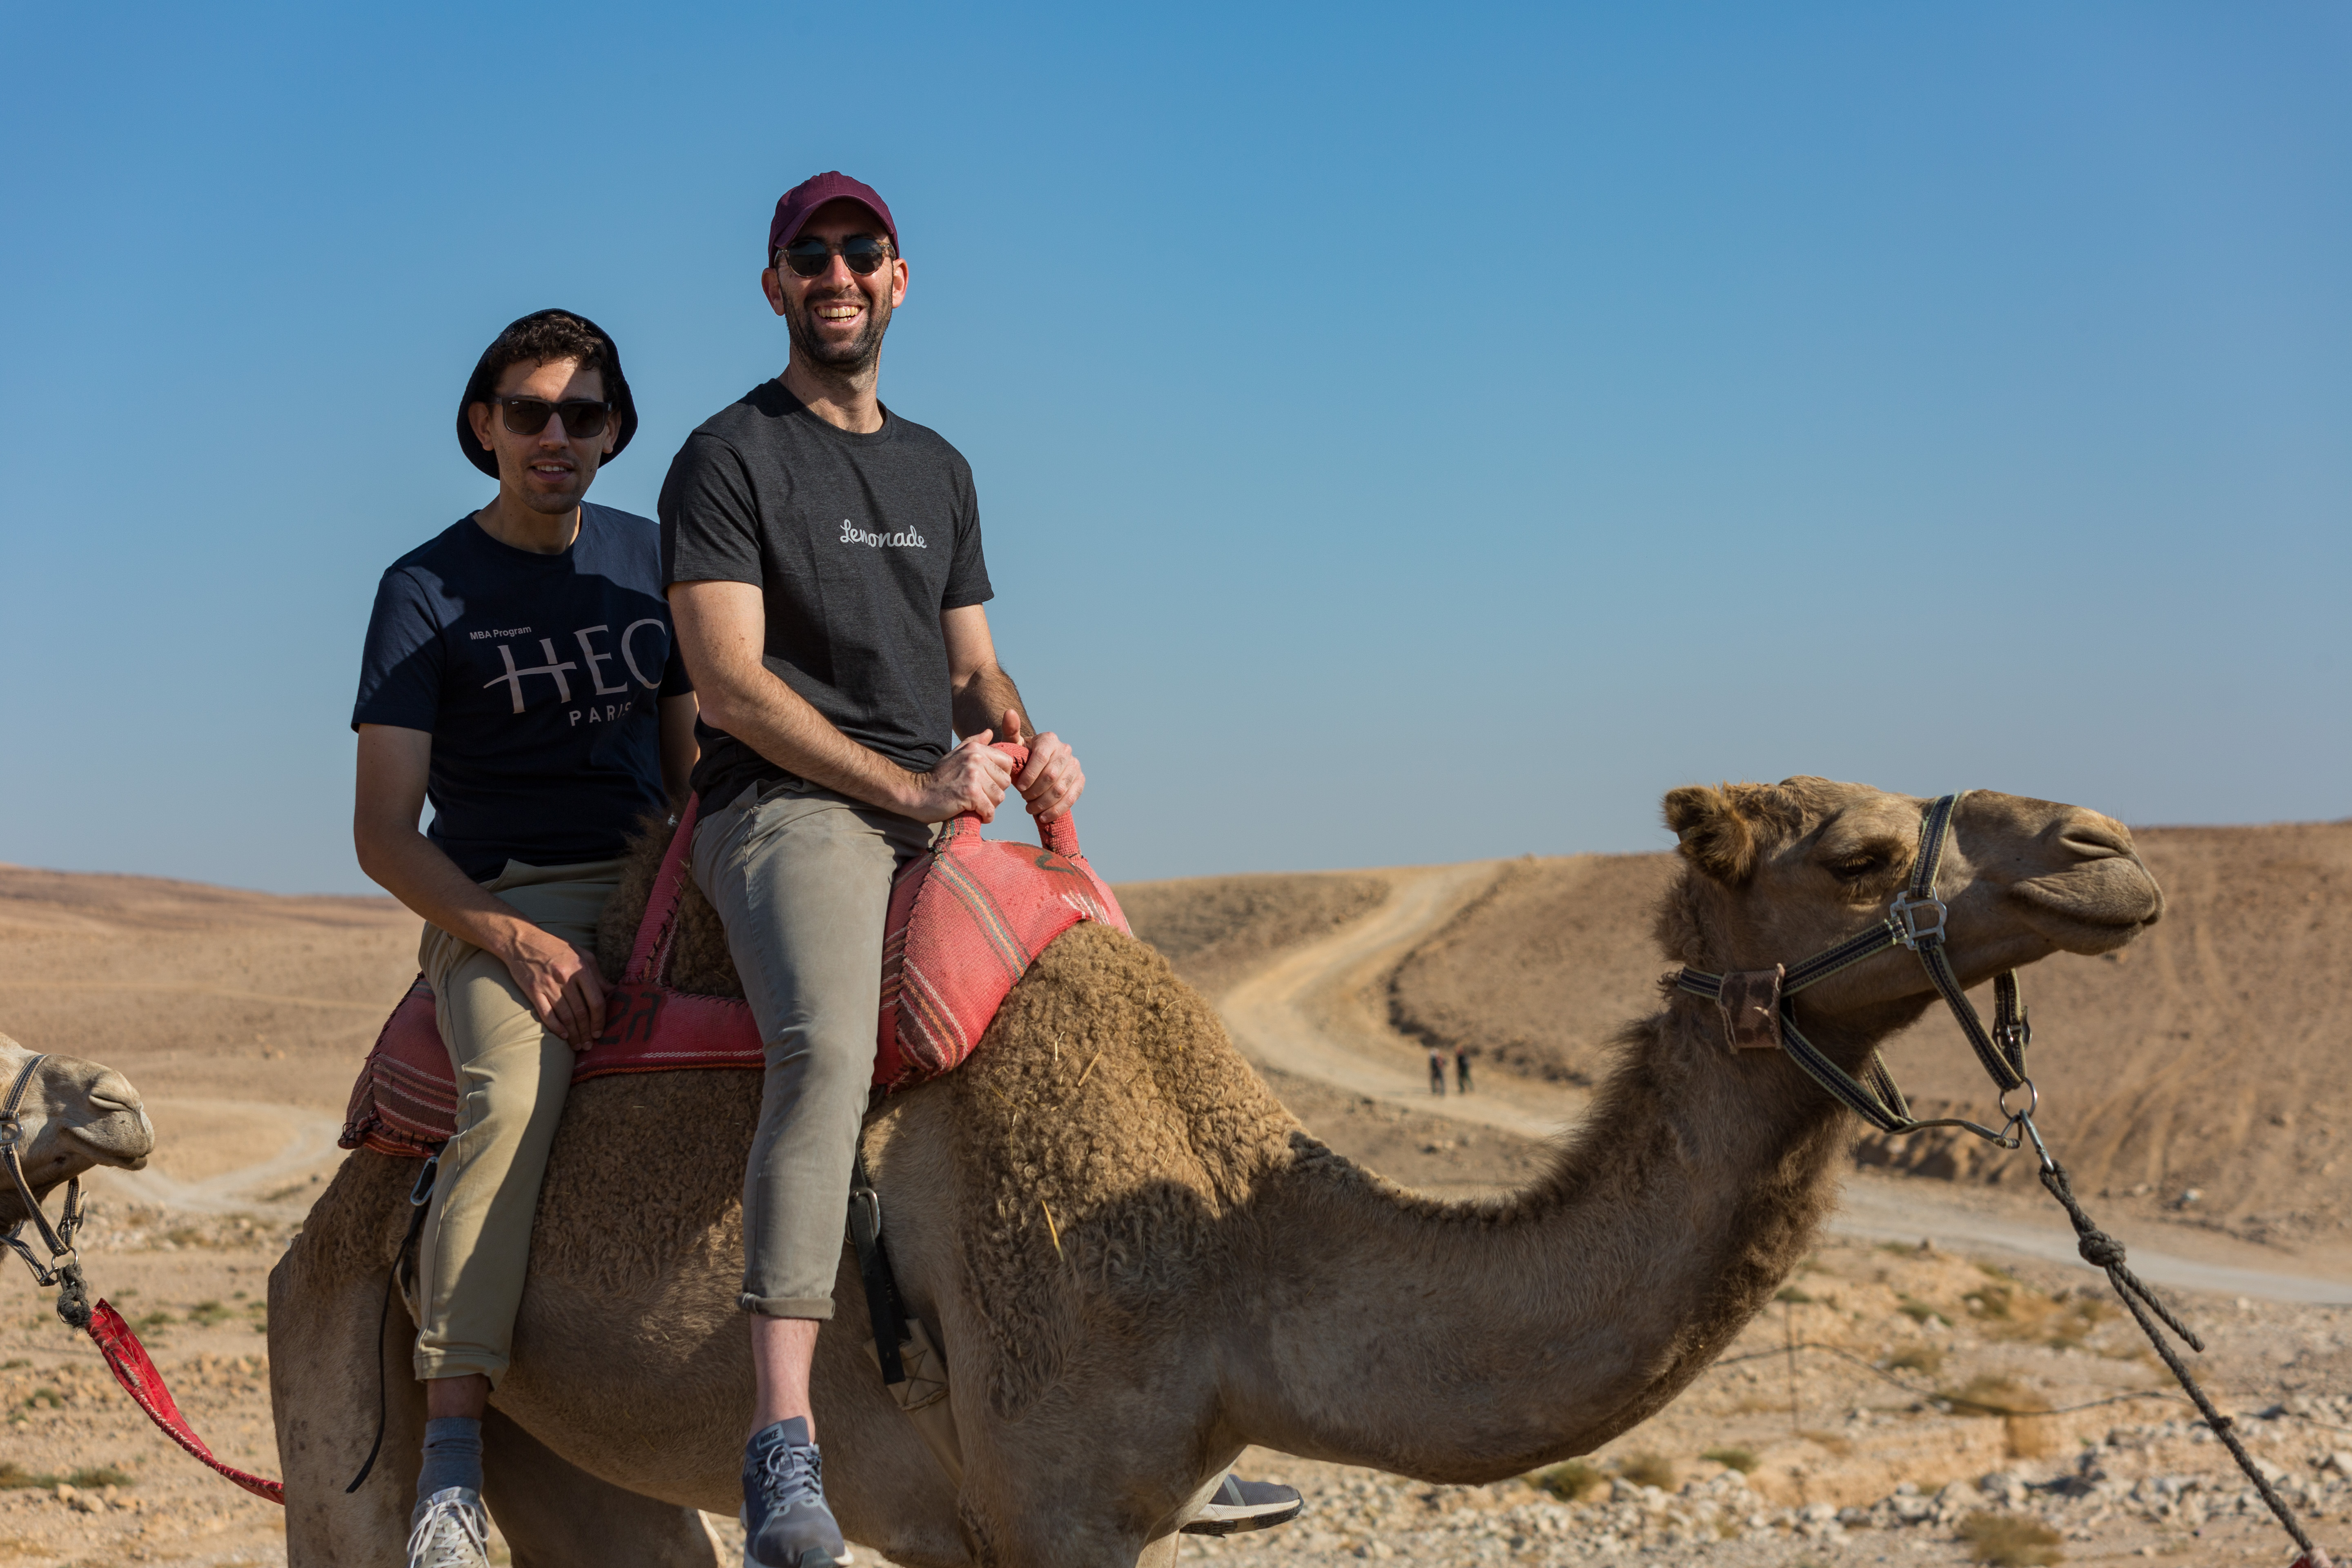 Our trek organizers, fearless on a camel